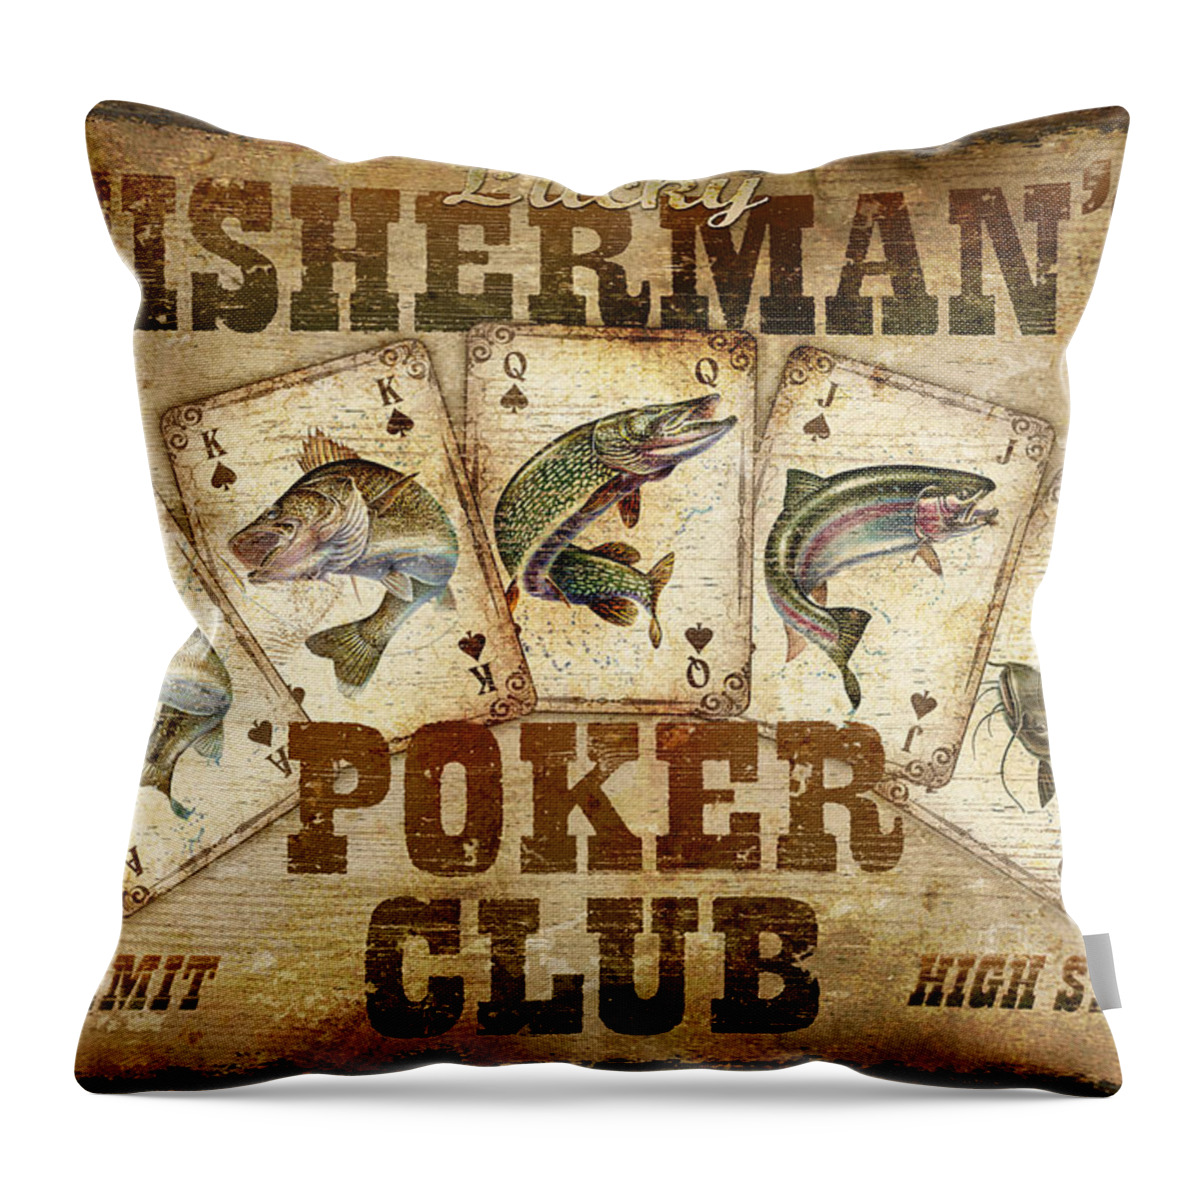 Jq Licensing Throw Pillow featuring the painting Fishermans Poker Club by JQ Licensing